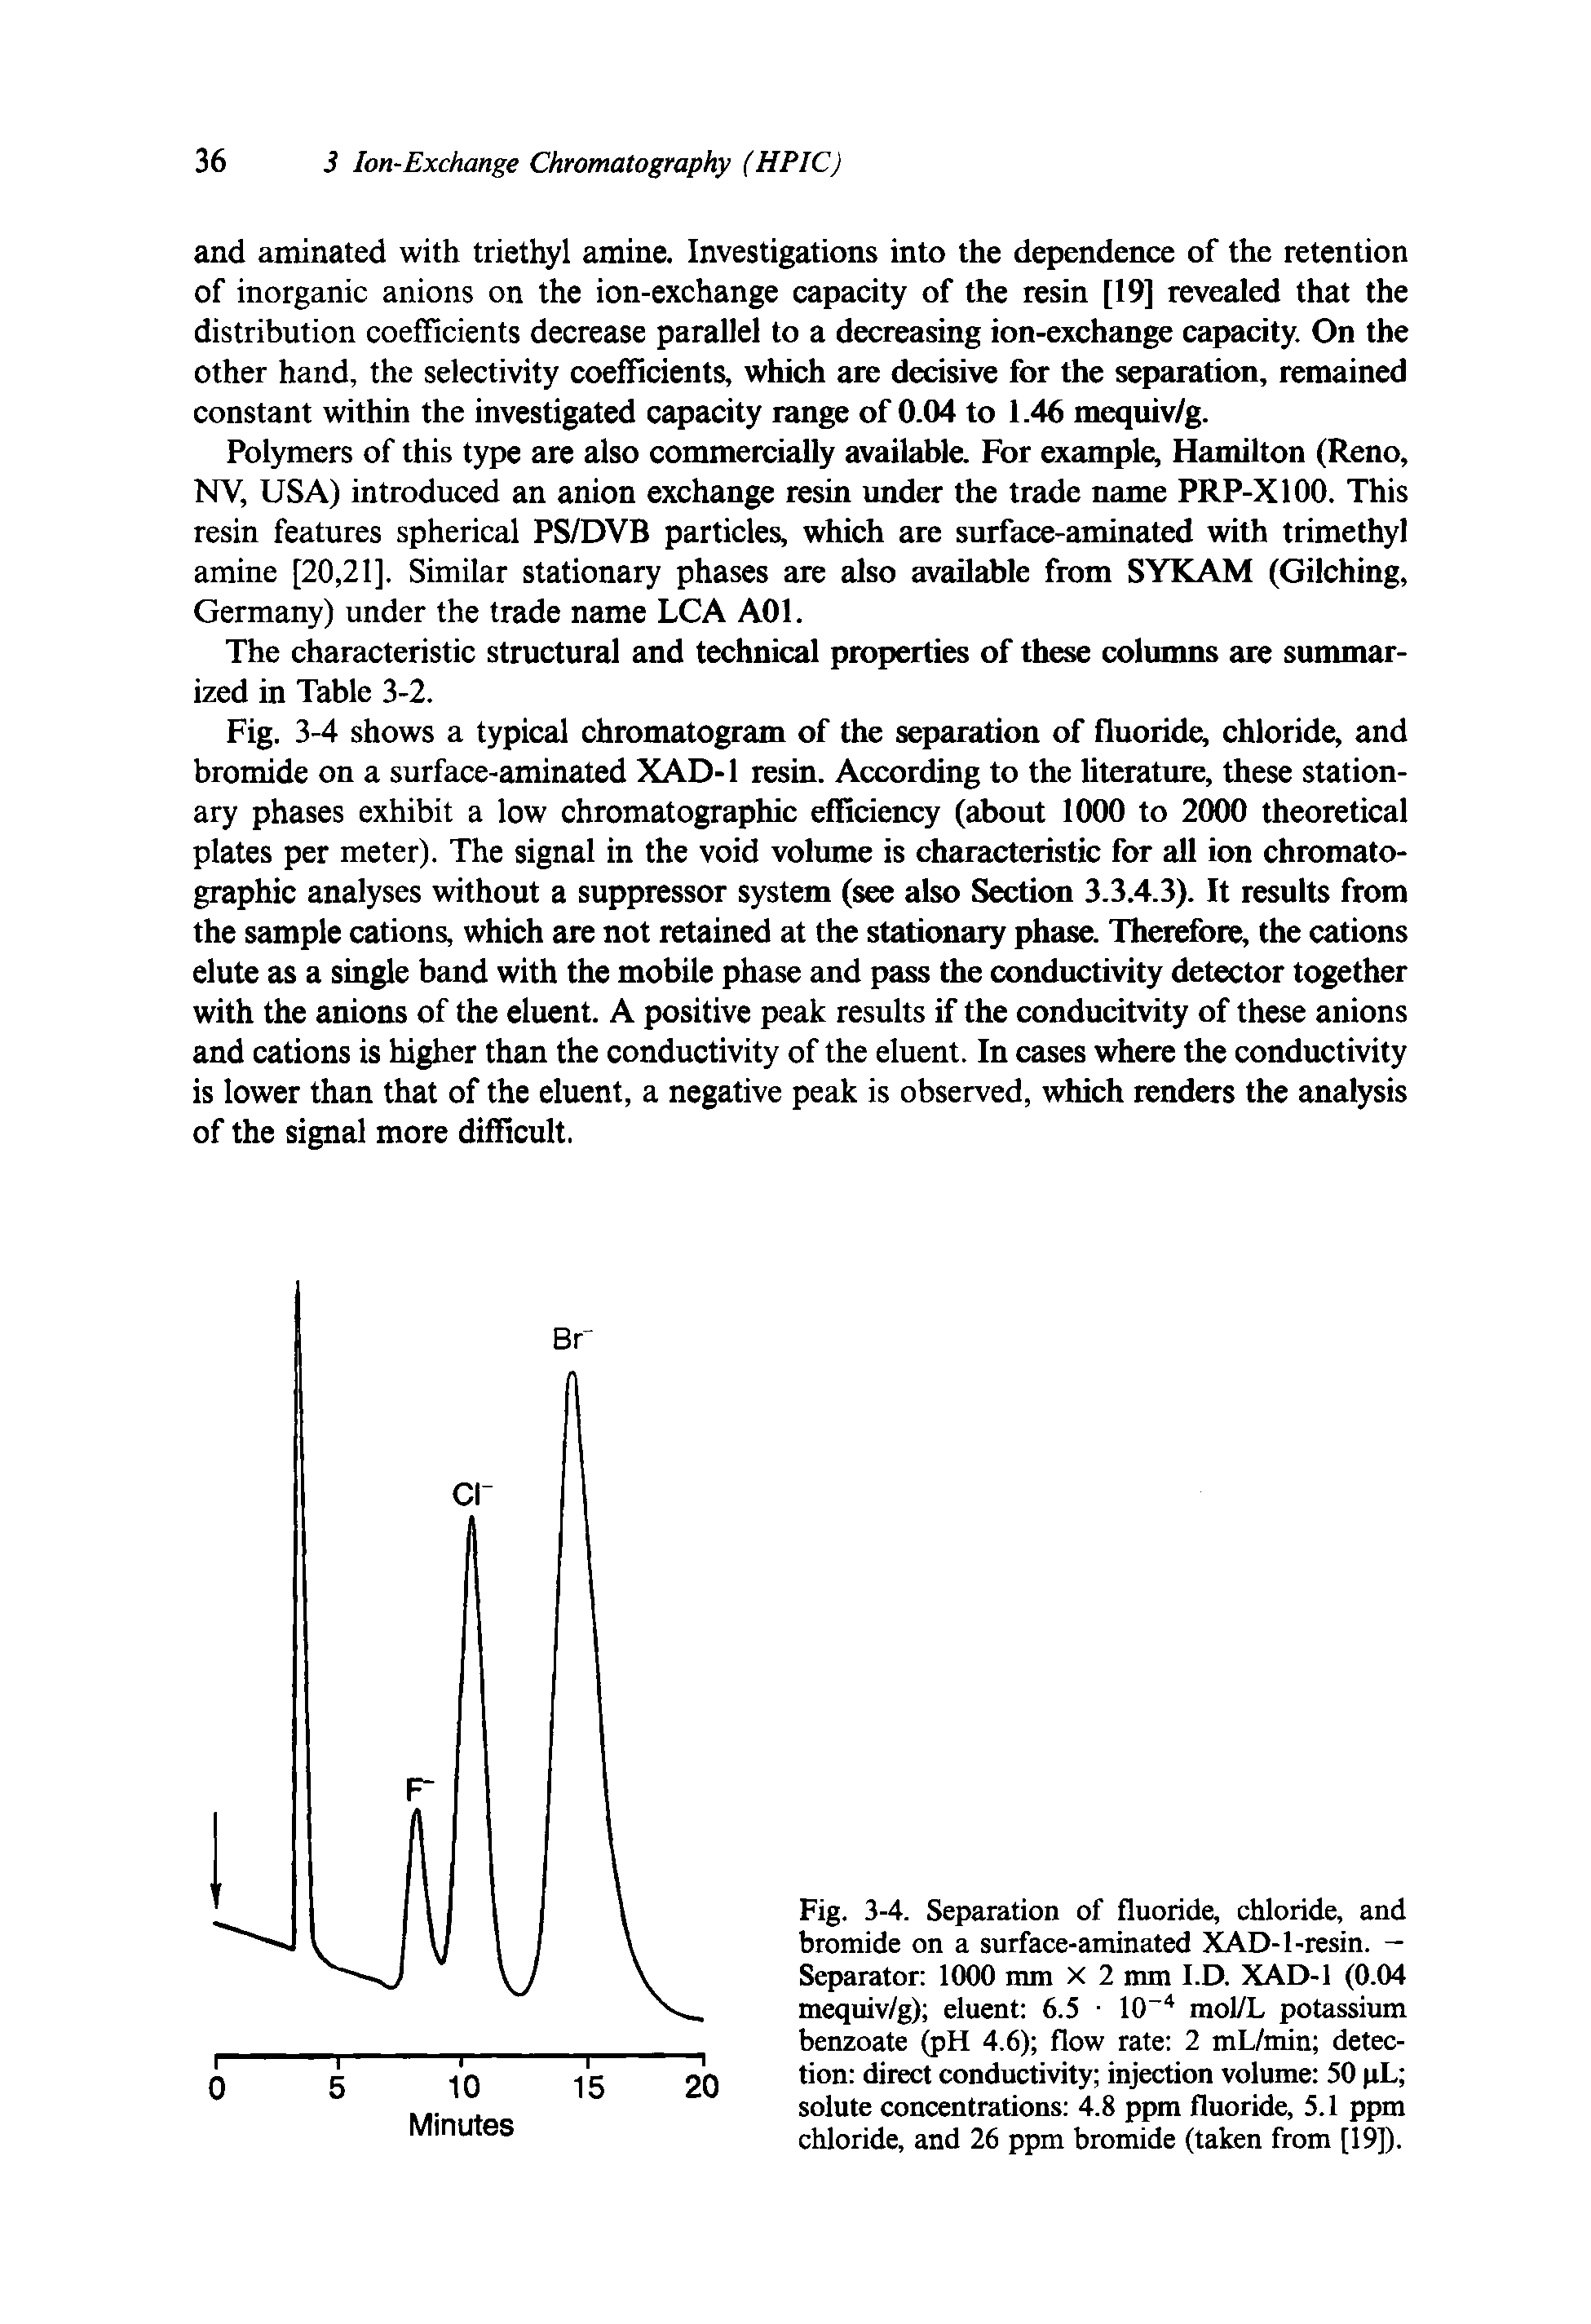 Fig. 3-4. Separation of fluoride, chloride, and bromide on a surface-aminated XAD-1-resin. — Separator 1000 mm X 2 mm I.D. XAD-1 (0.04 mequiv/g) eluent 6.5 10-4 mol/L potassium benzoate (pH 4.6) flow rate 2 mL/min detection direct conductivity injection volume 50 pL solute concentrations 4.8 ppm fluoride, 5.1 ppm chloride, and 26 ppm bromide (taken from [19]).